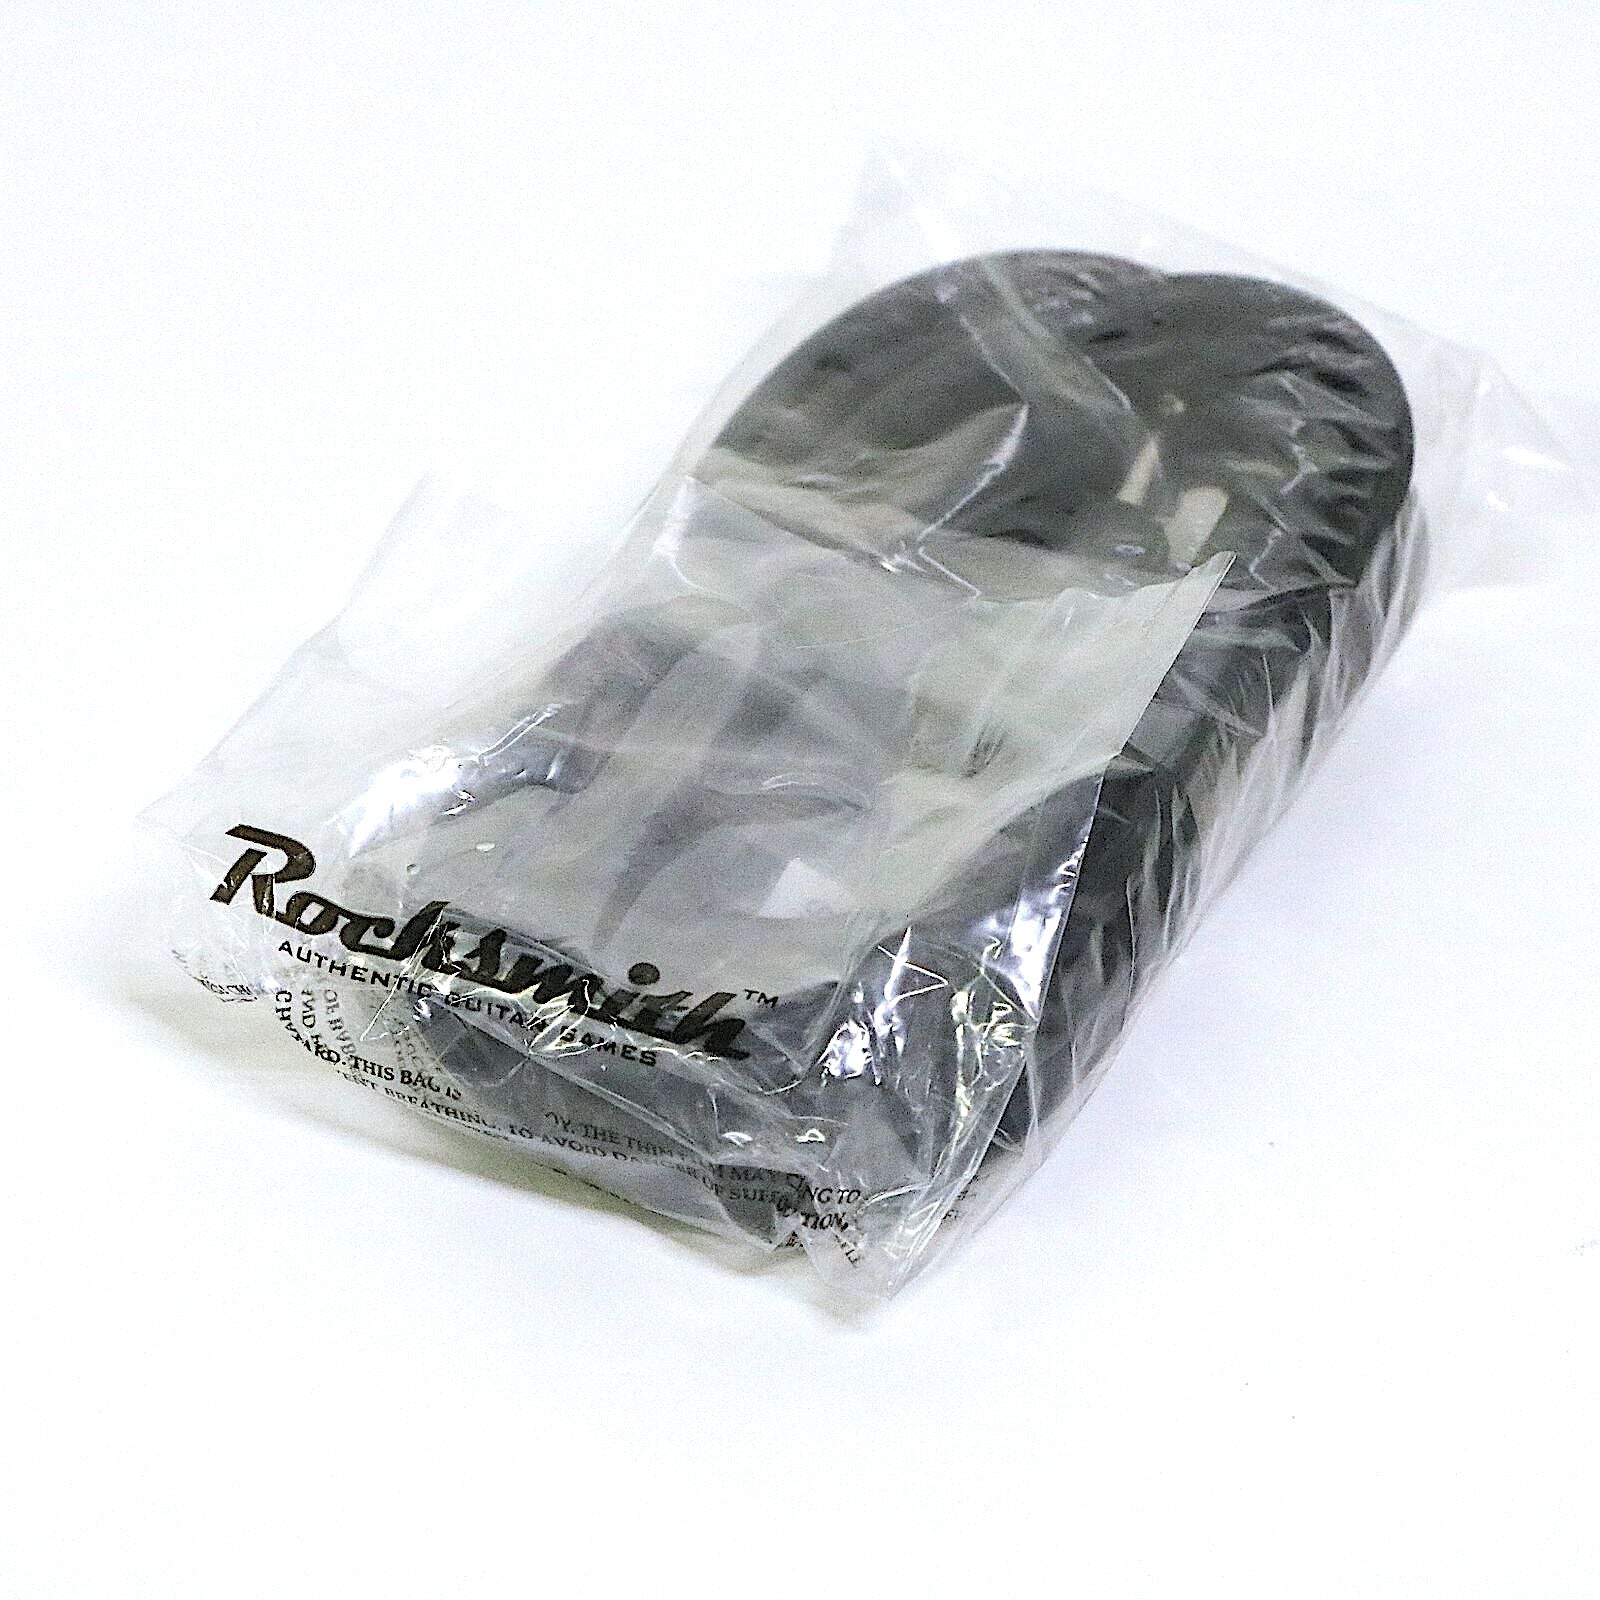 Rocksmith Real Tone Cable For Guitar And Bass PS3 PS4 PC XBOX 360 ONE Controller